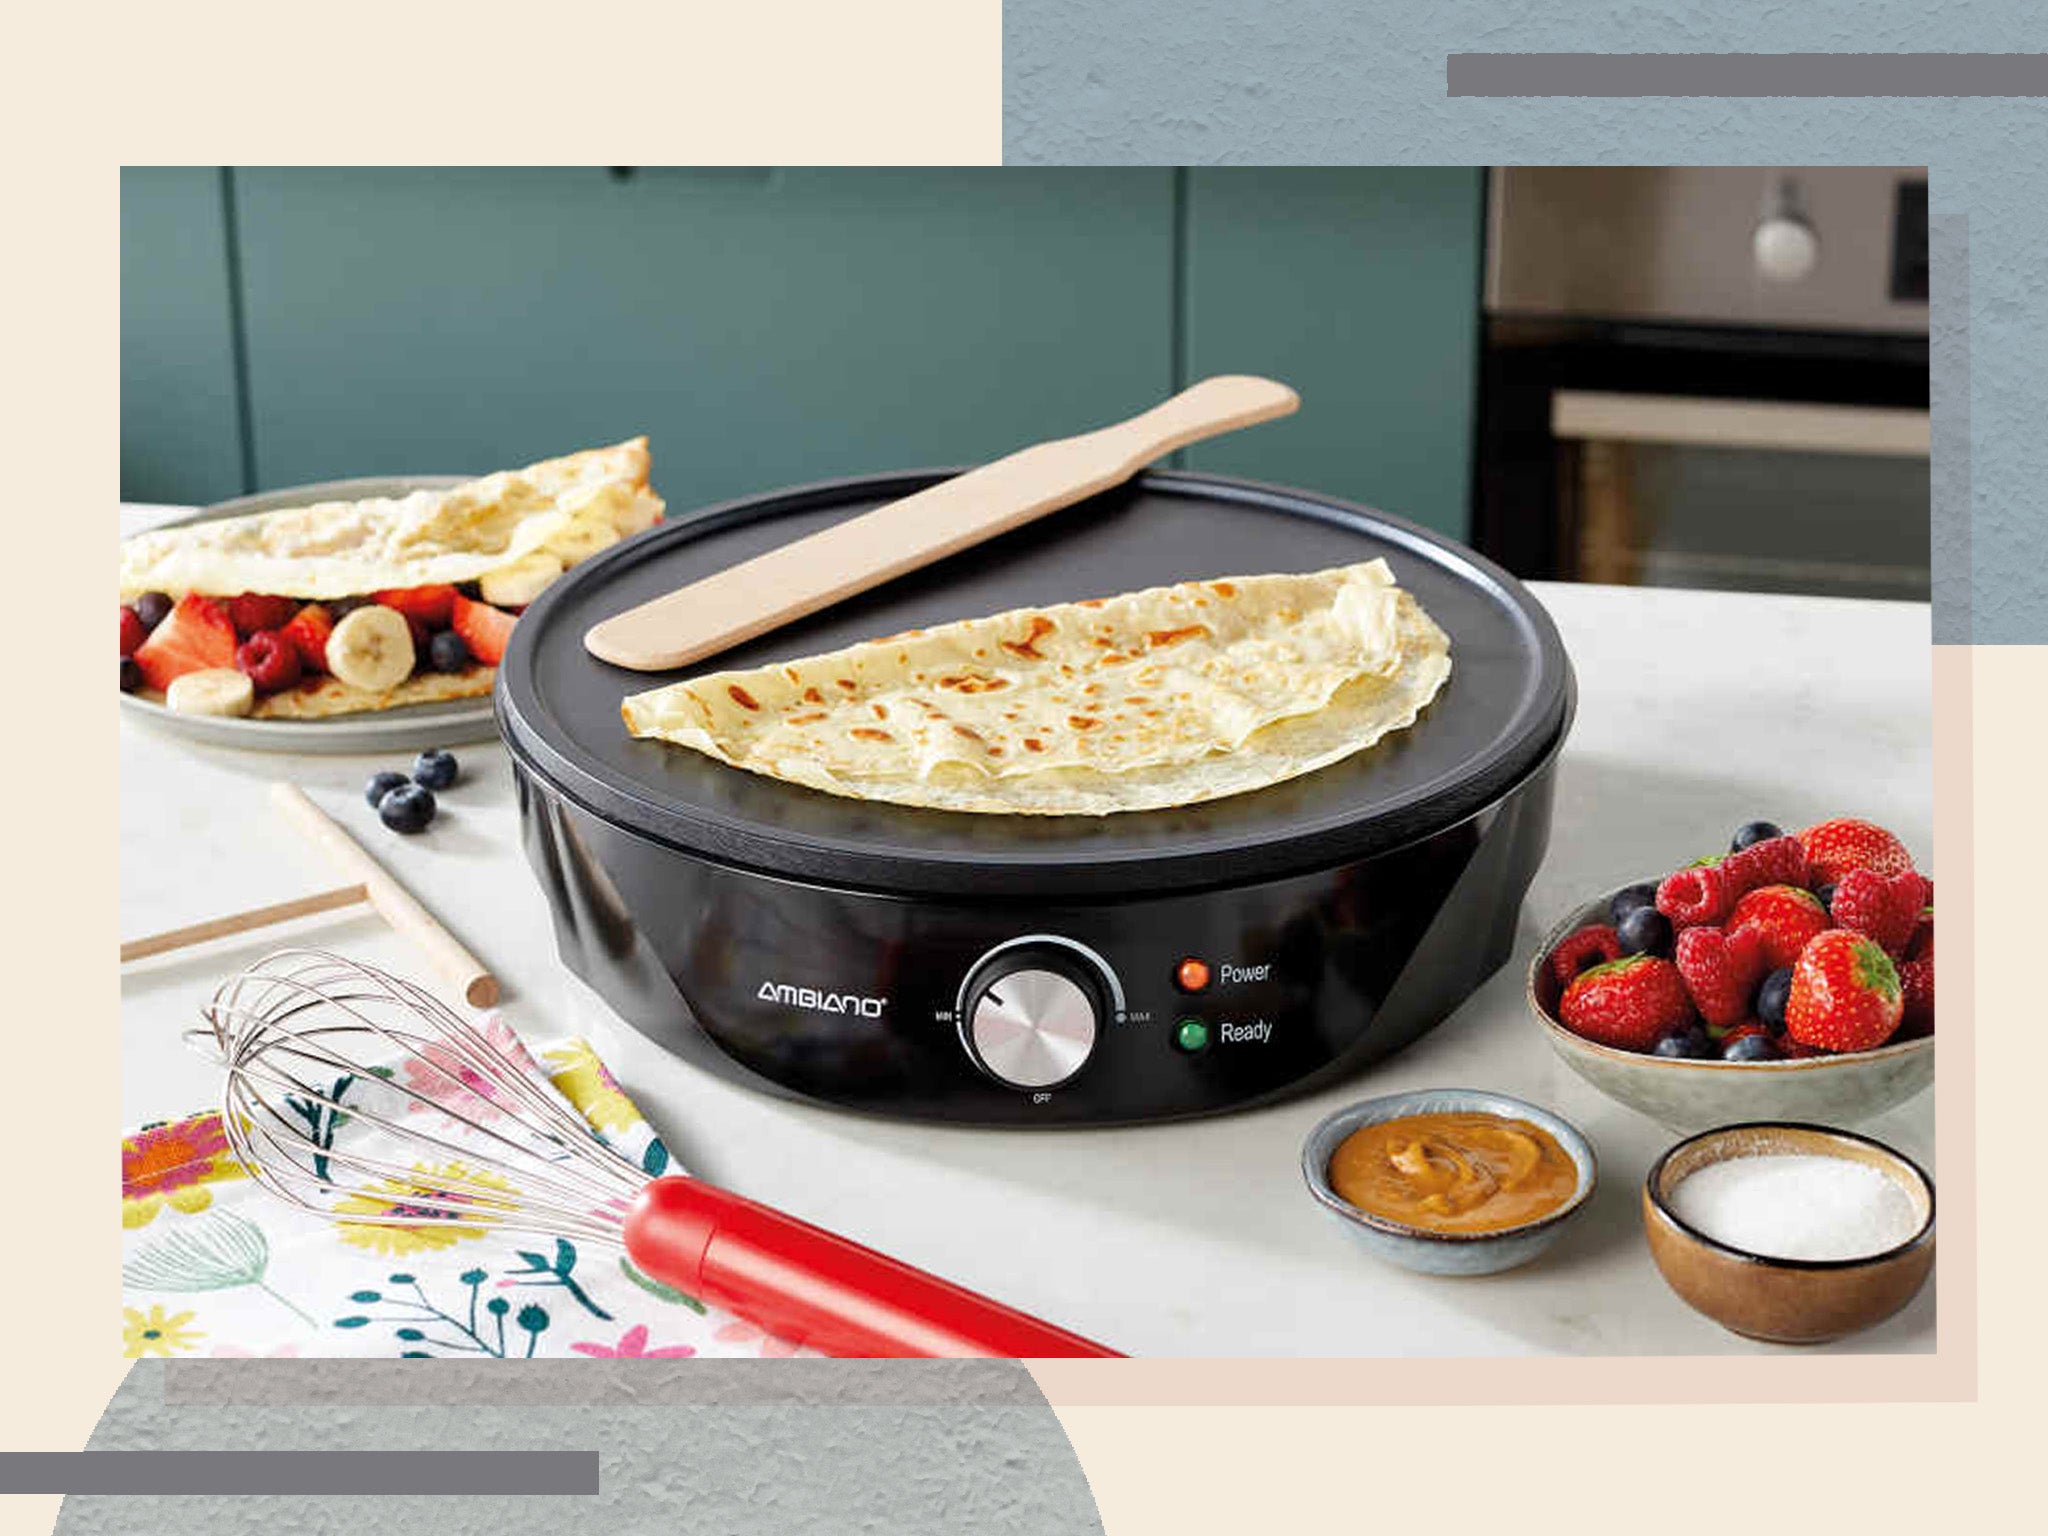 Aldi launches £17.99 crepe maker for Pancake Day